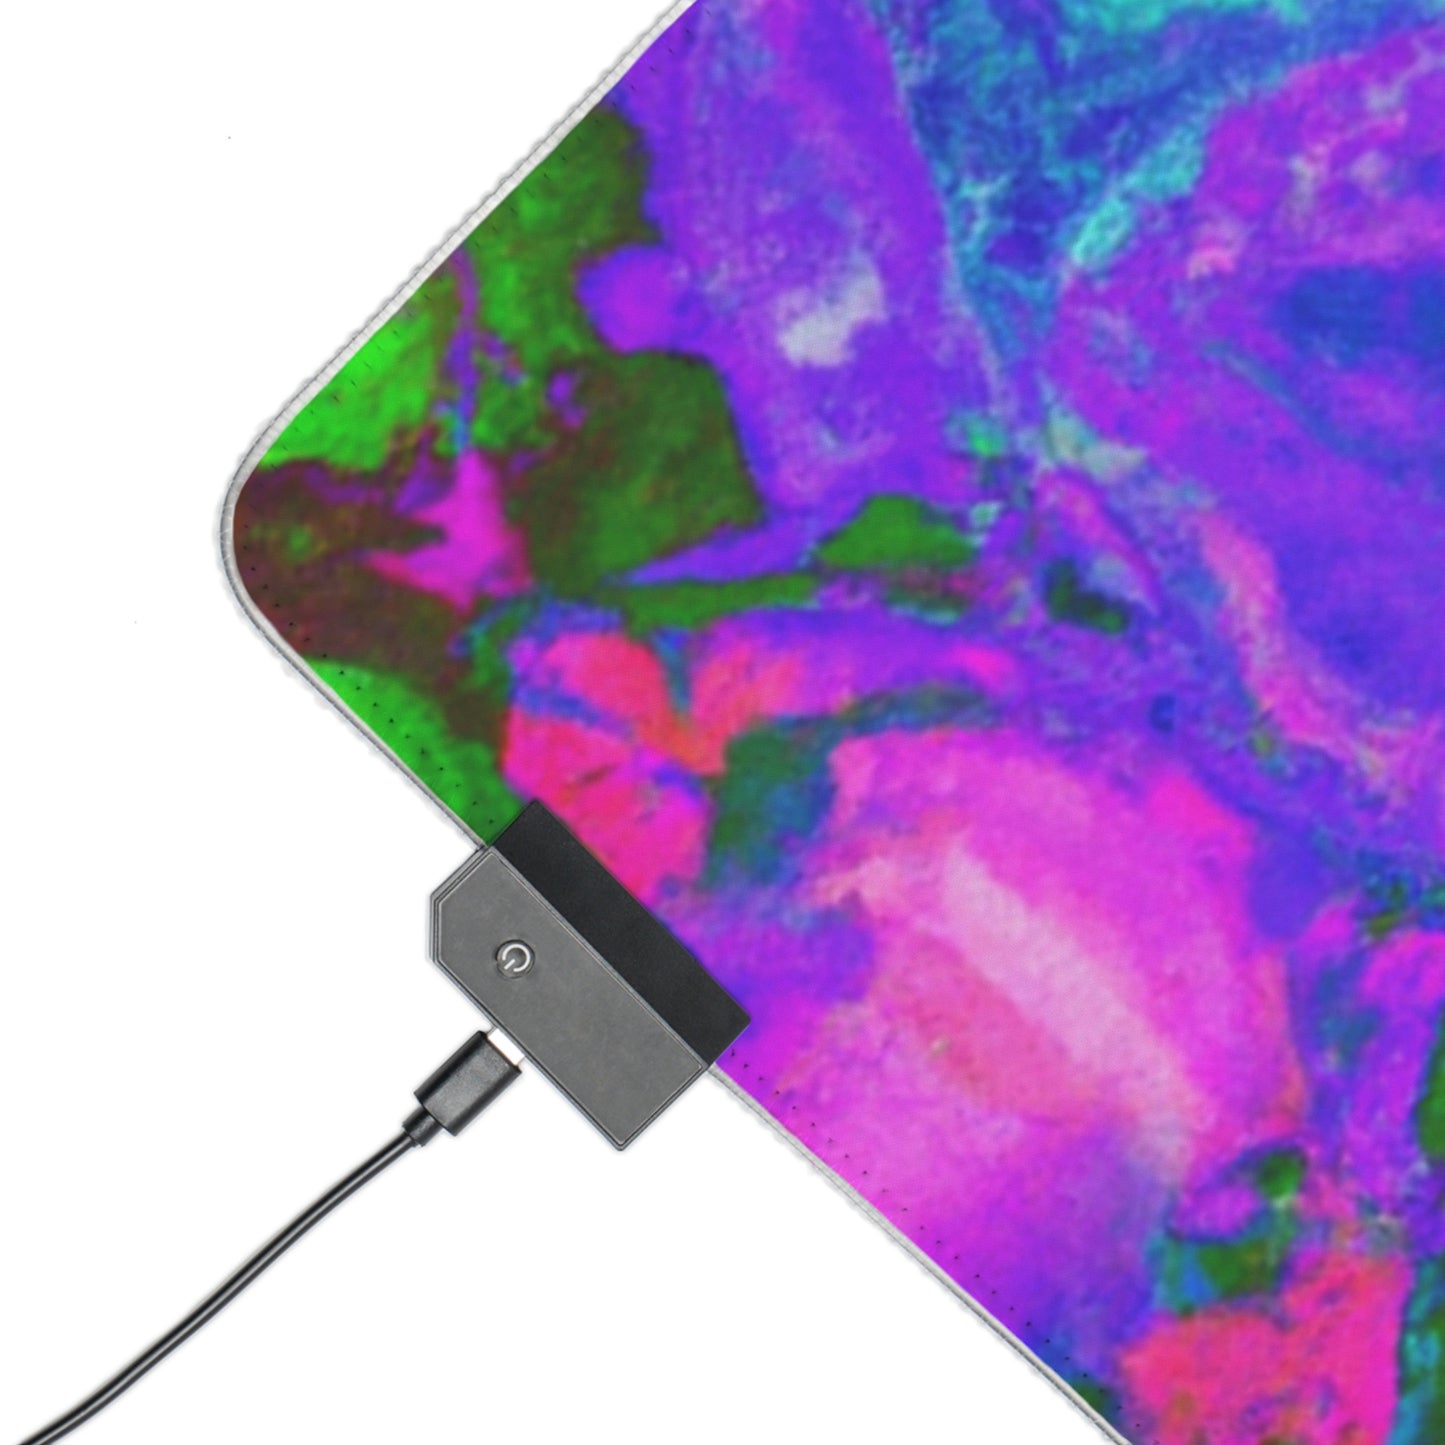 Jedediah Blaster - Psychedelic Trippy LED Light Up Gaming Mouse Pad